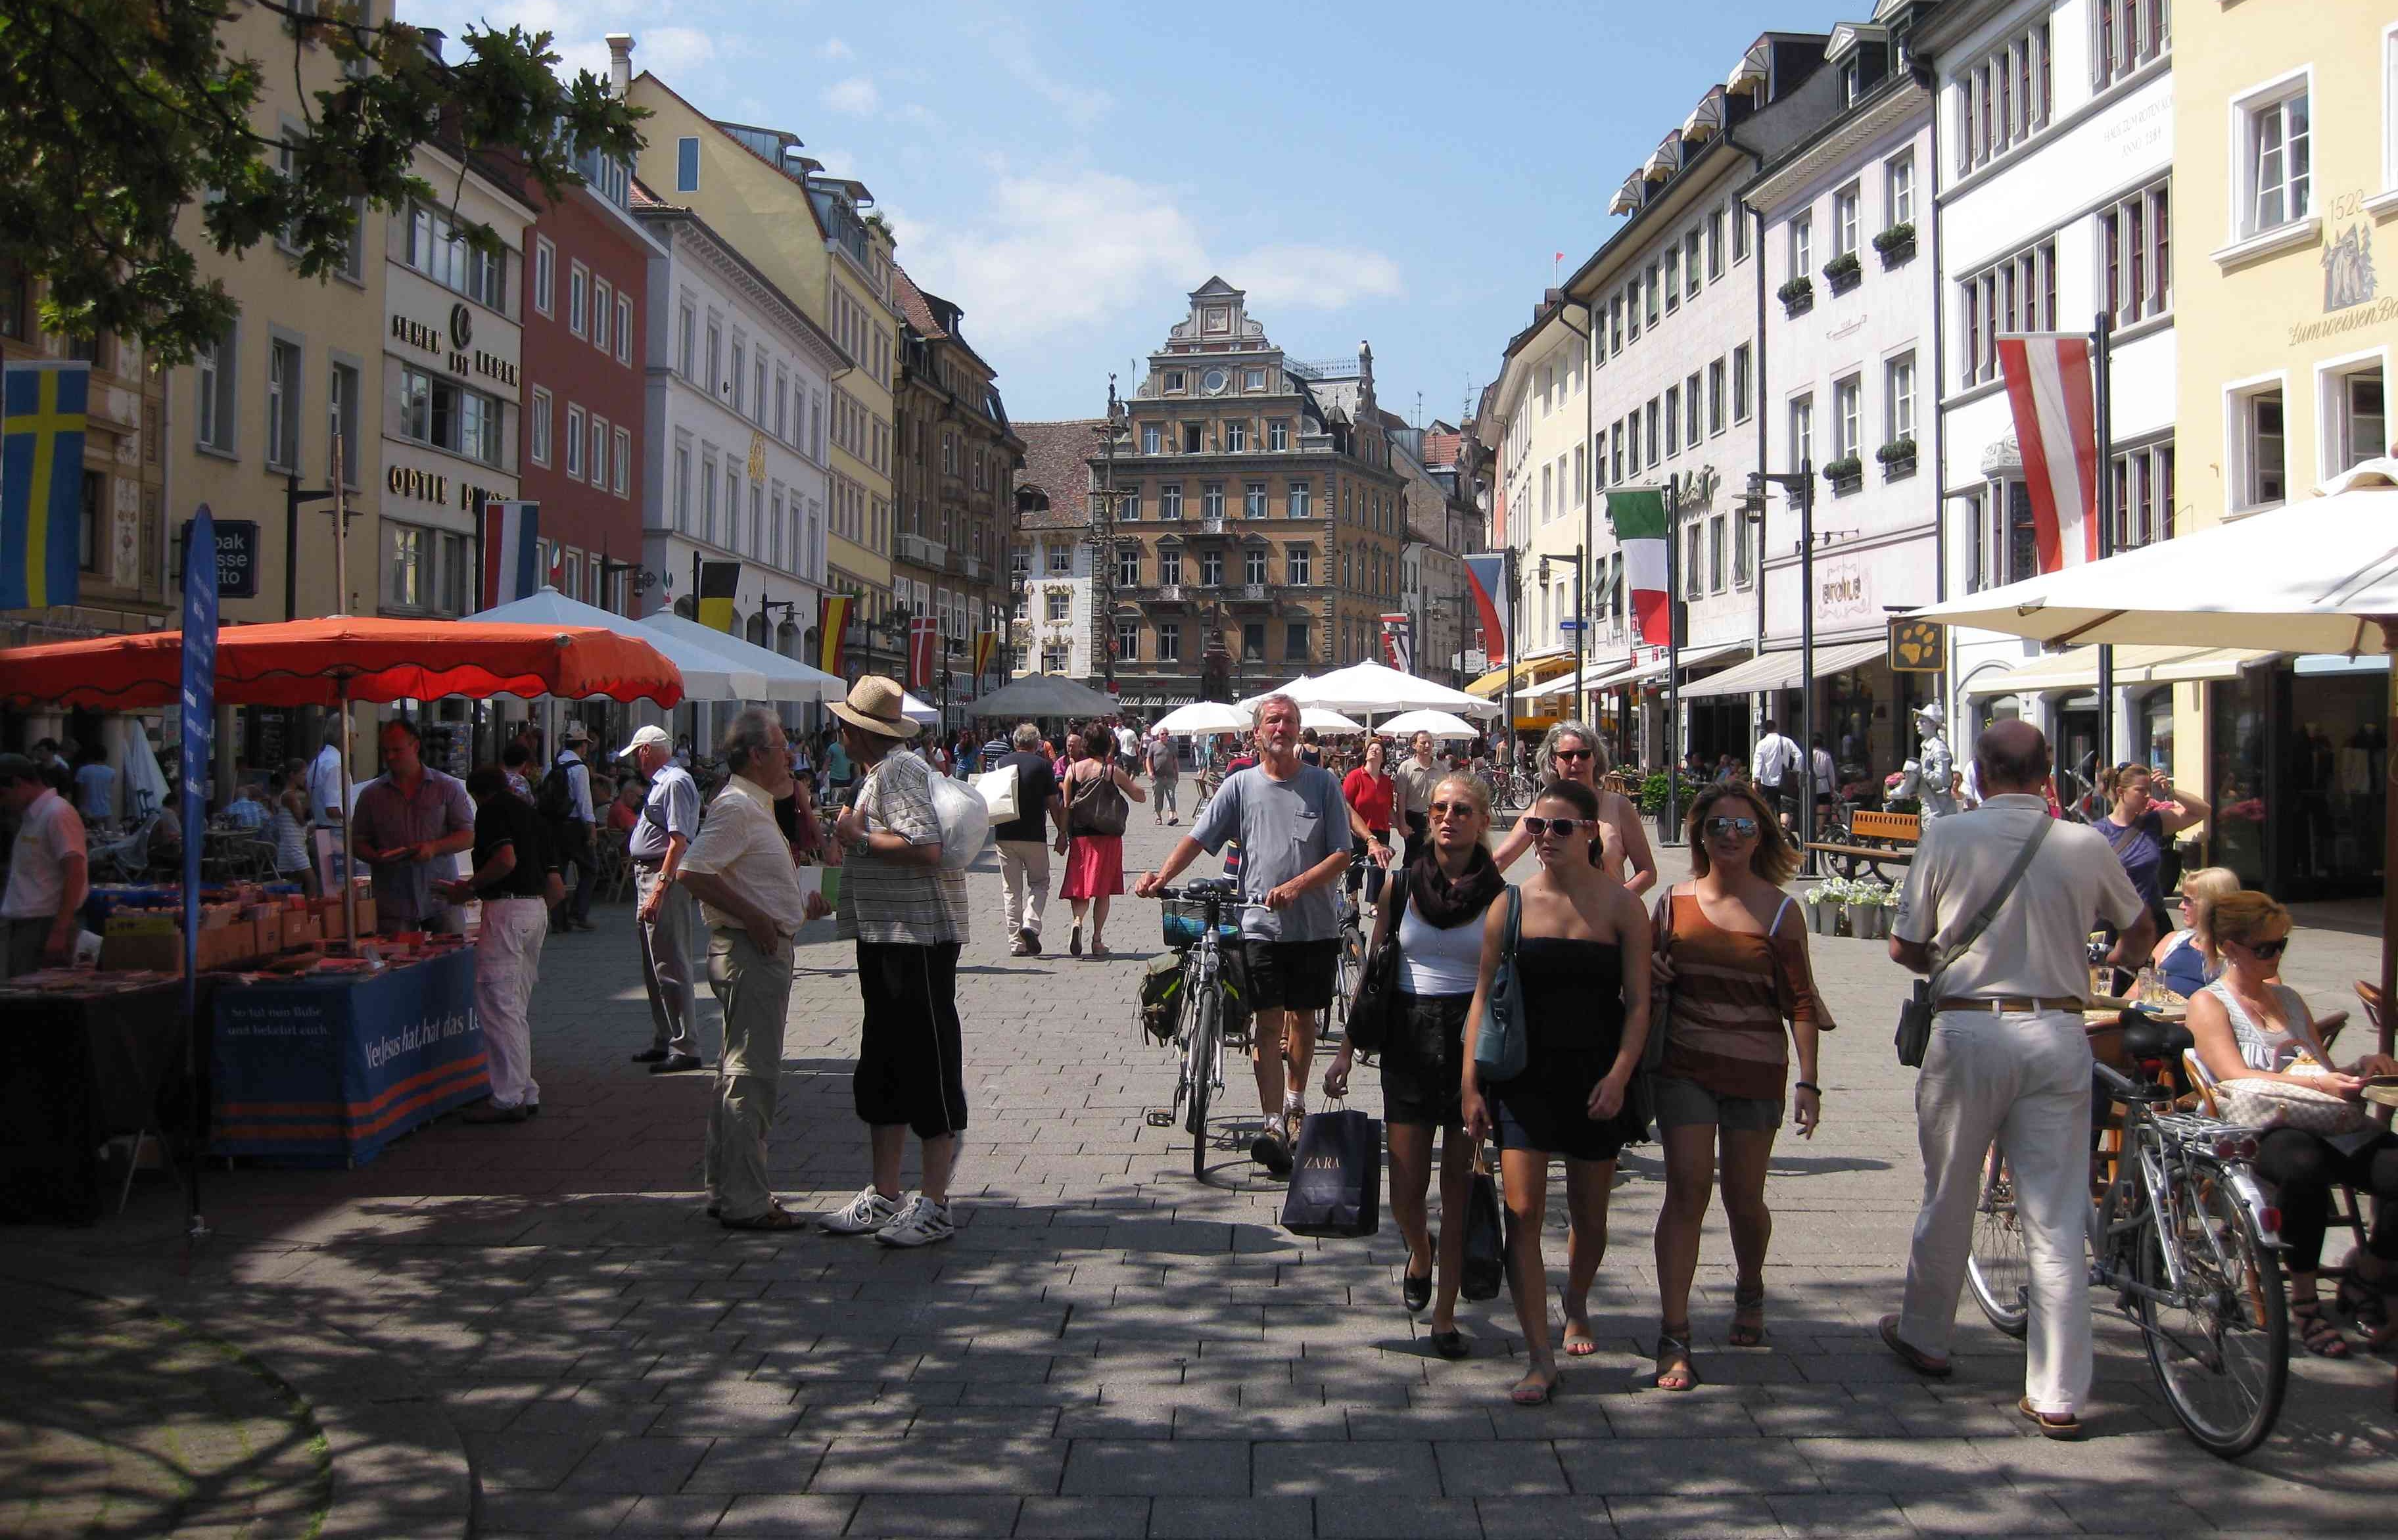 Shoppers in Constance, Germany